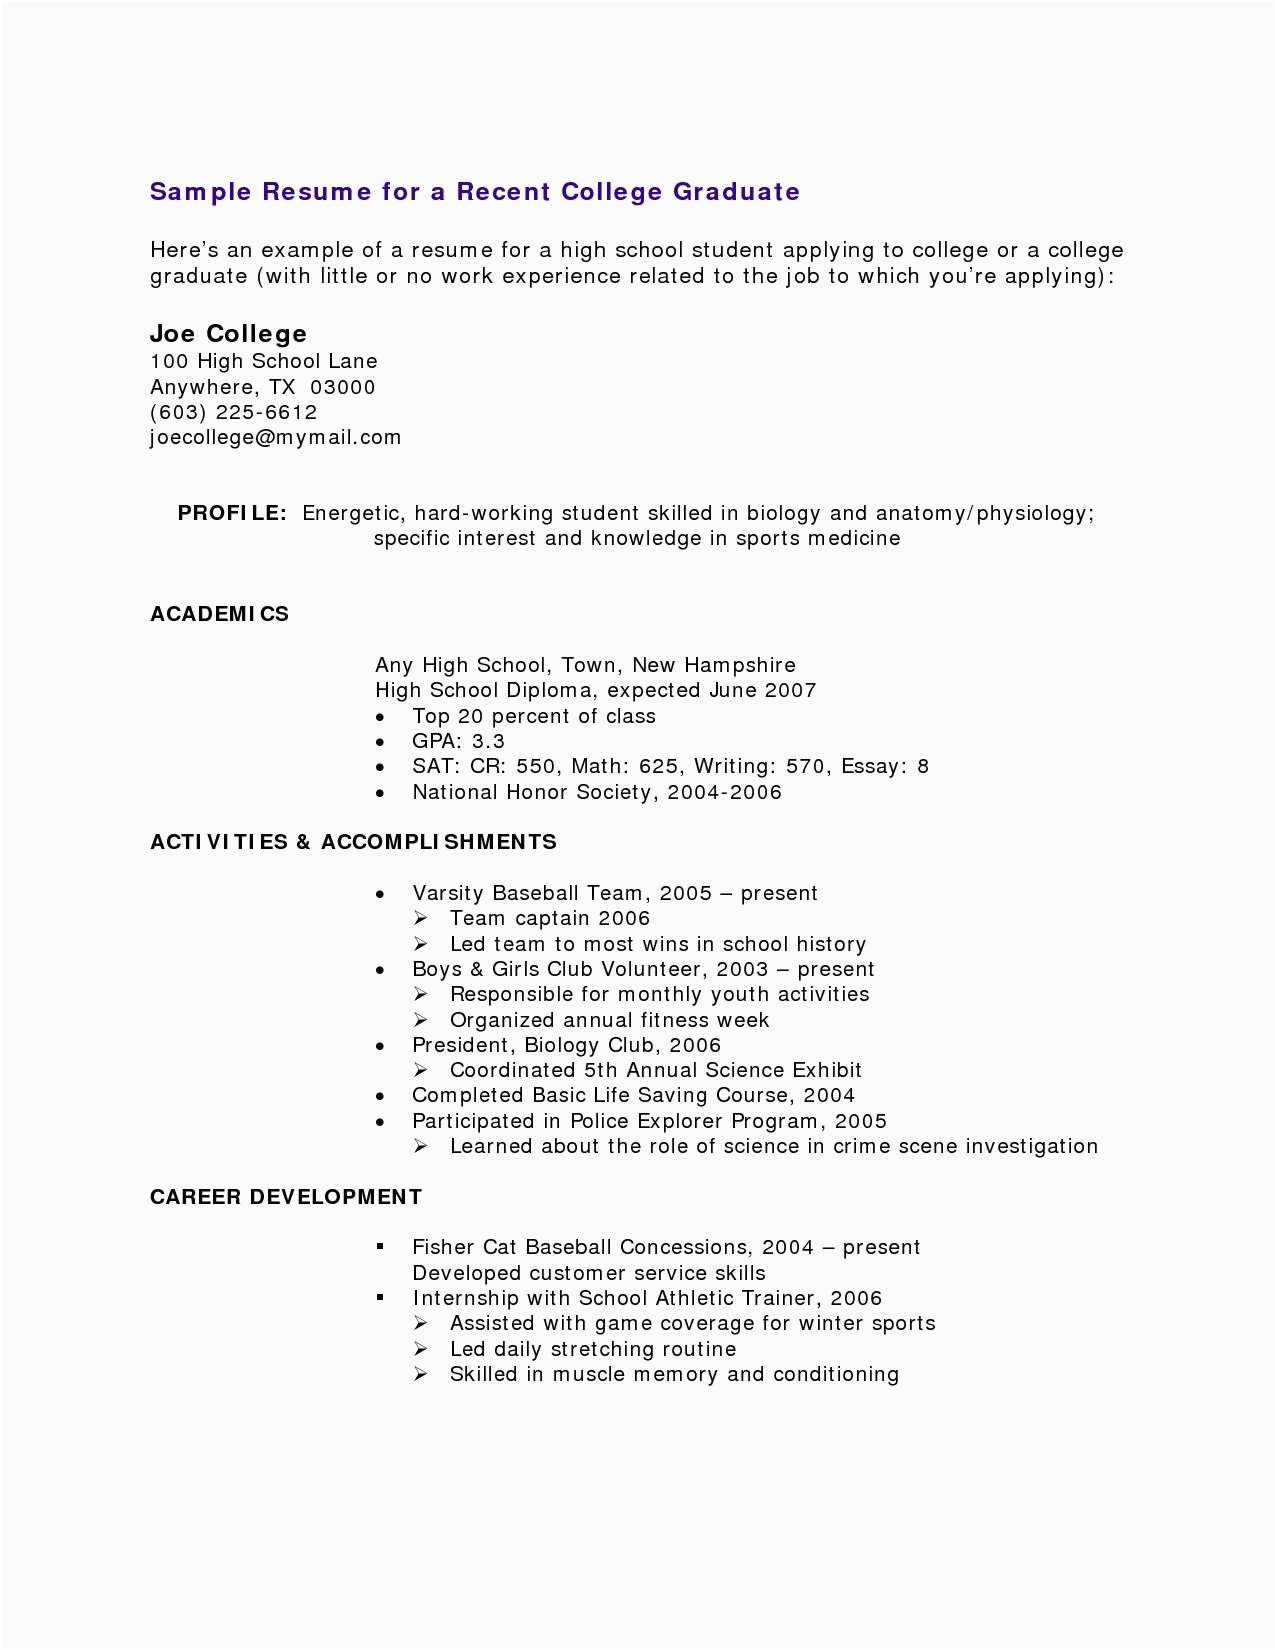 Student Resume Templates Free No Work Experience Cover Letter for Student athlete with No Work Experience